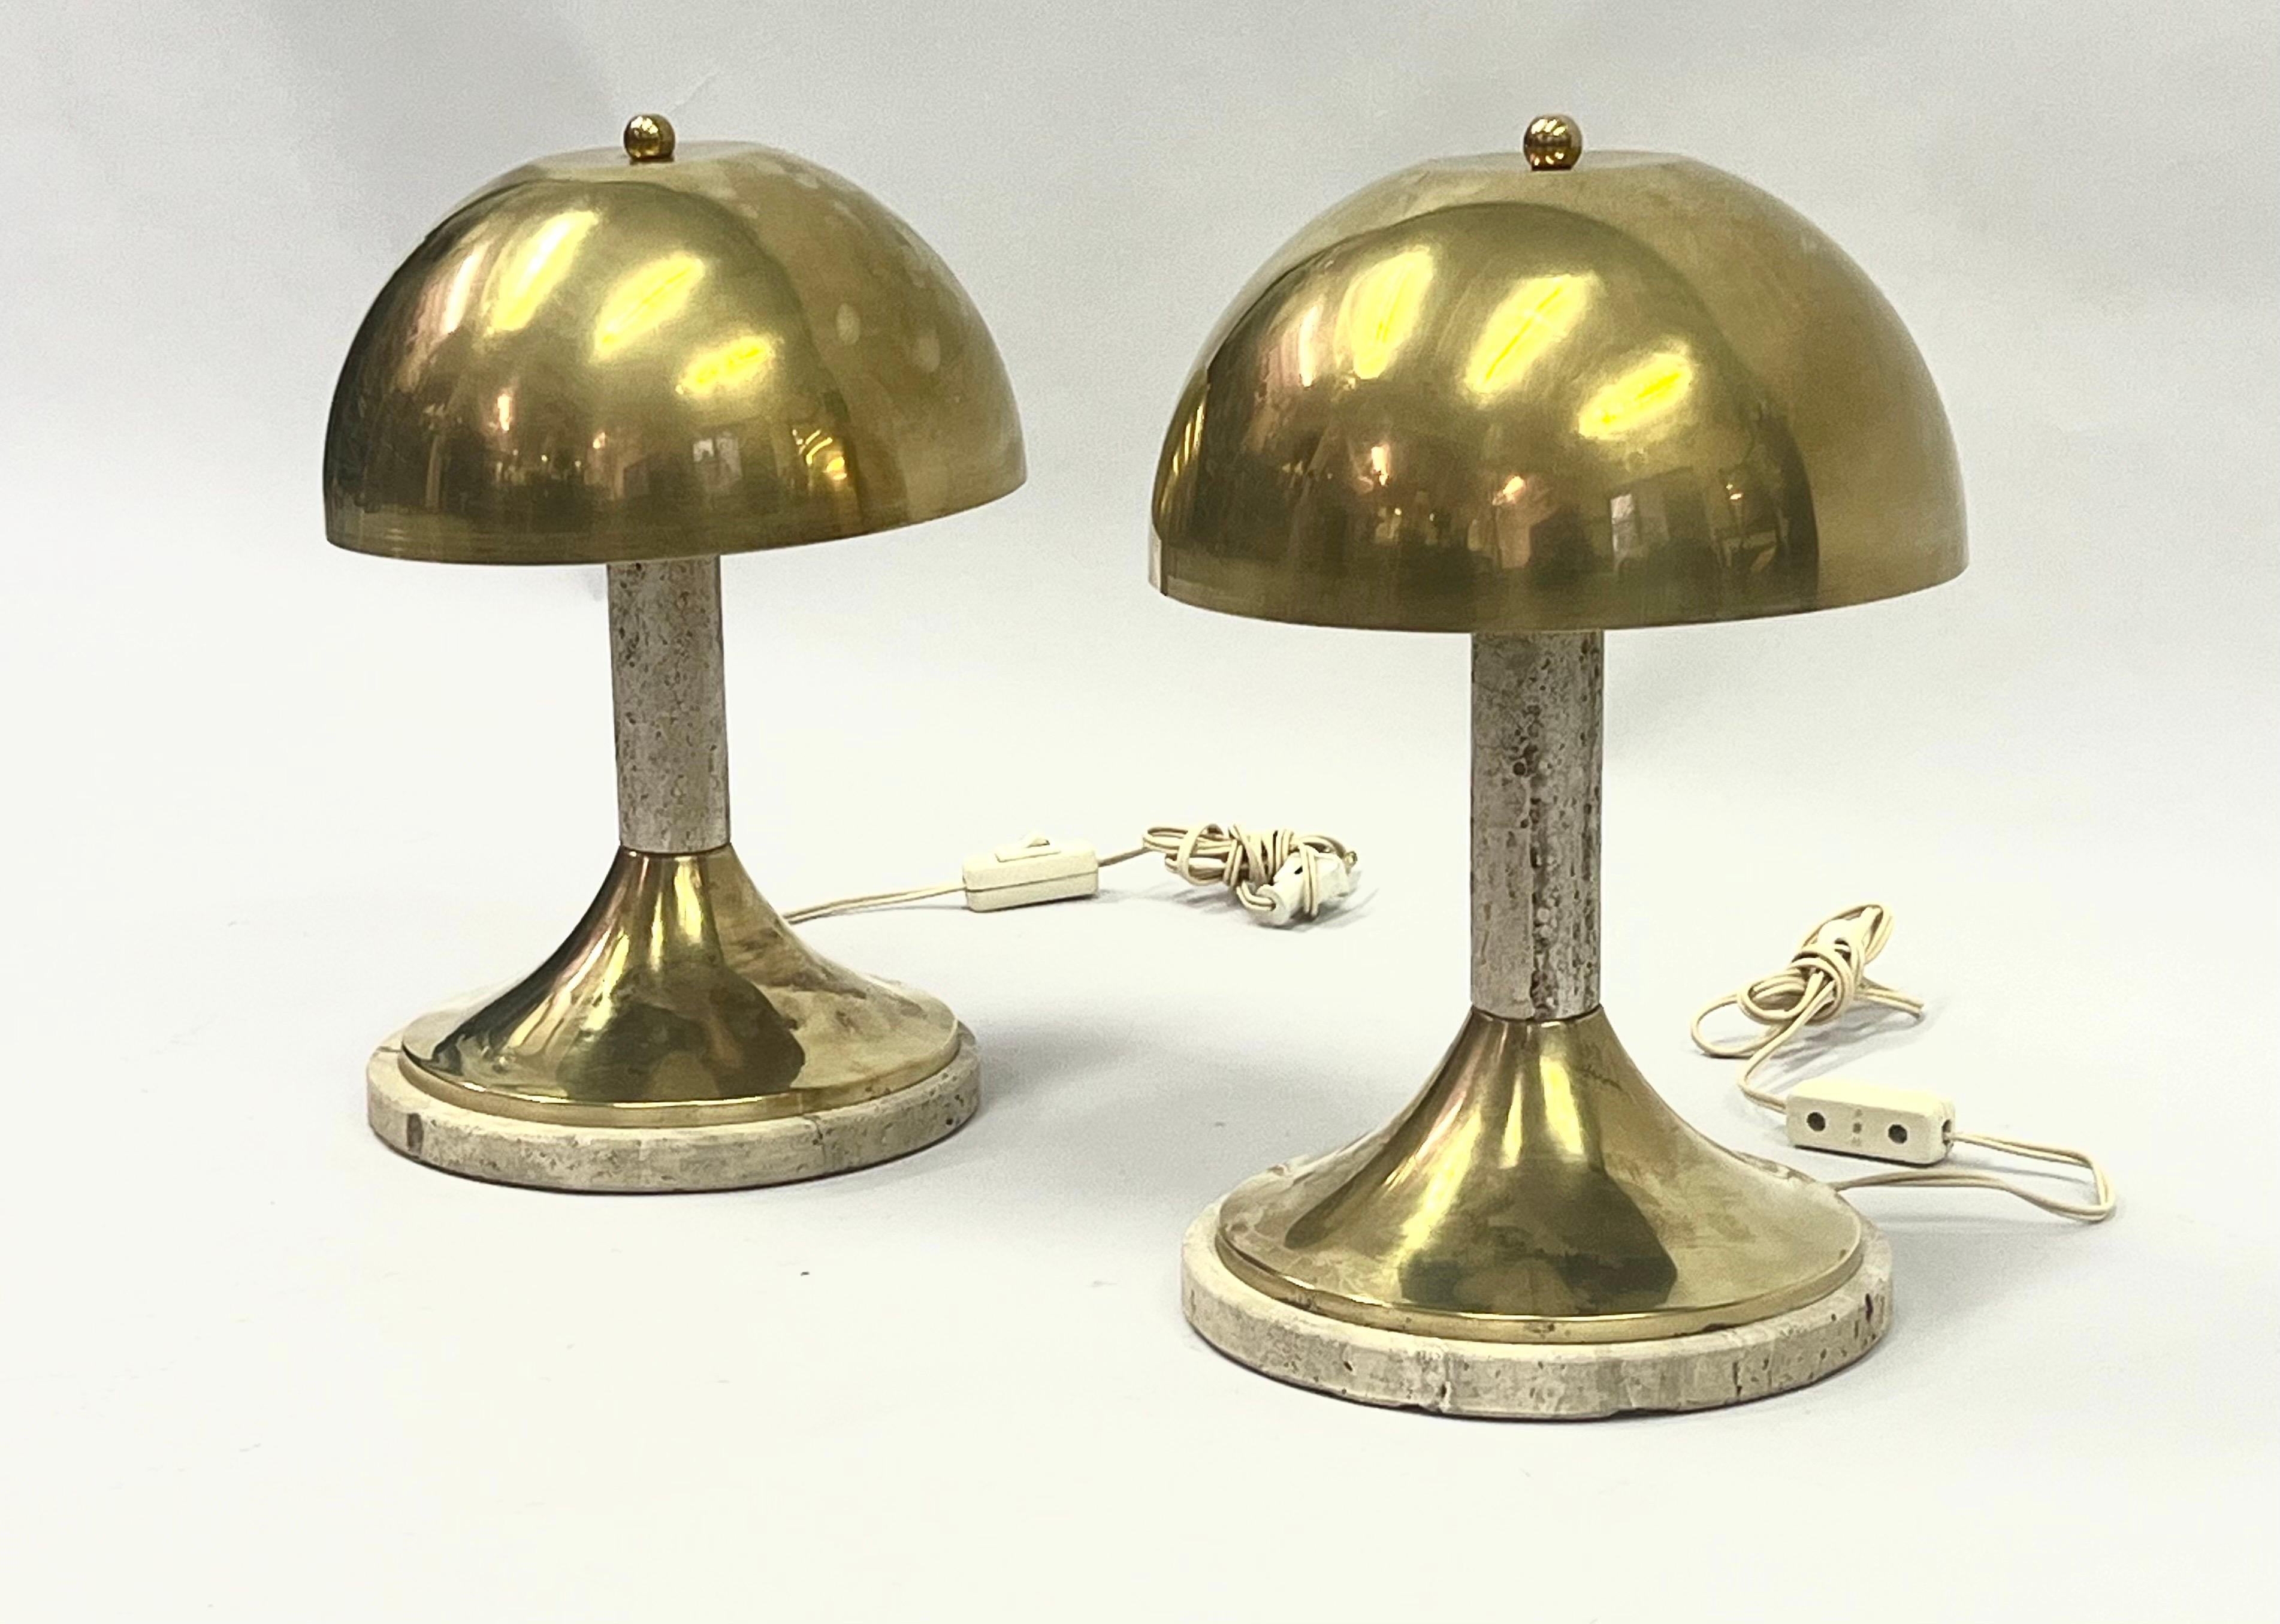 A Rare Pair of Italian Mid-Century Modern table lamps in brass and Roman Travertine attributed to Gabriella Crespi (1922 - 2017) circa 1970. Gabriella Crespi was one of the most important Italian artists during the 2nd half of the 20th Century. Her